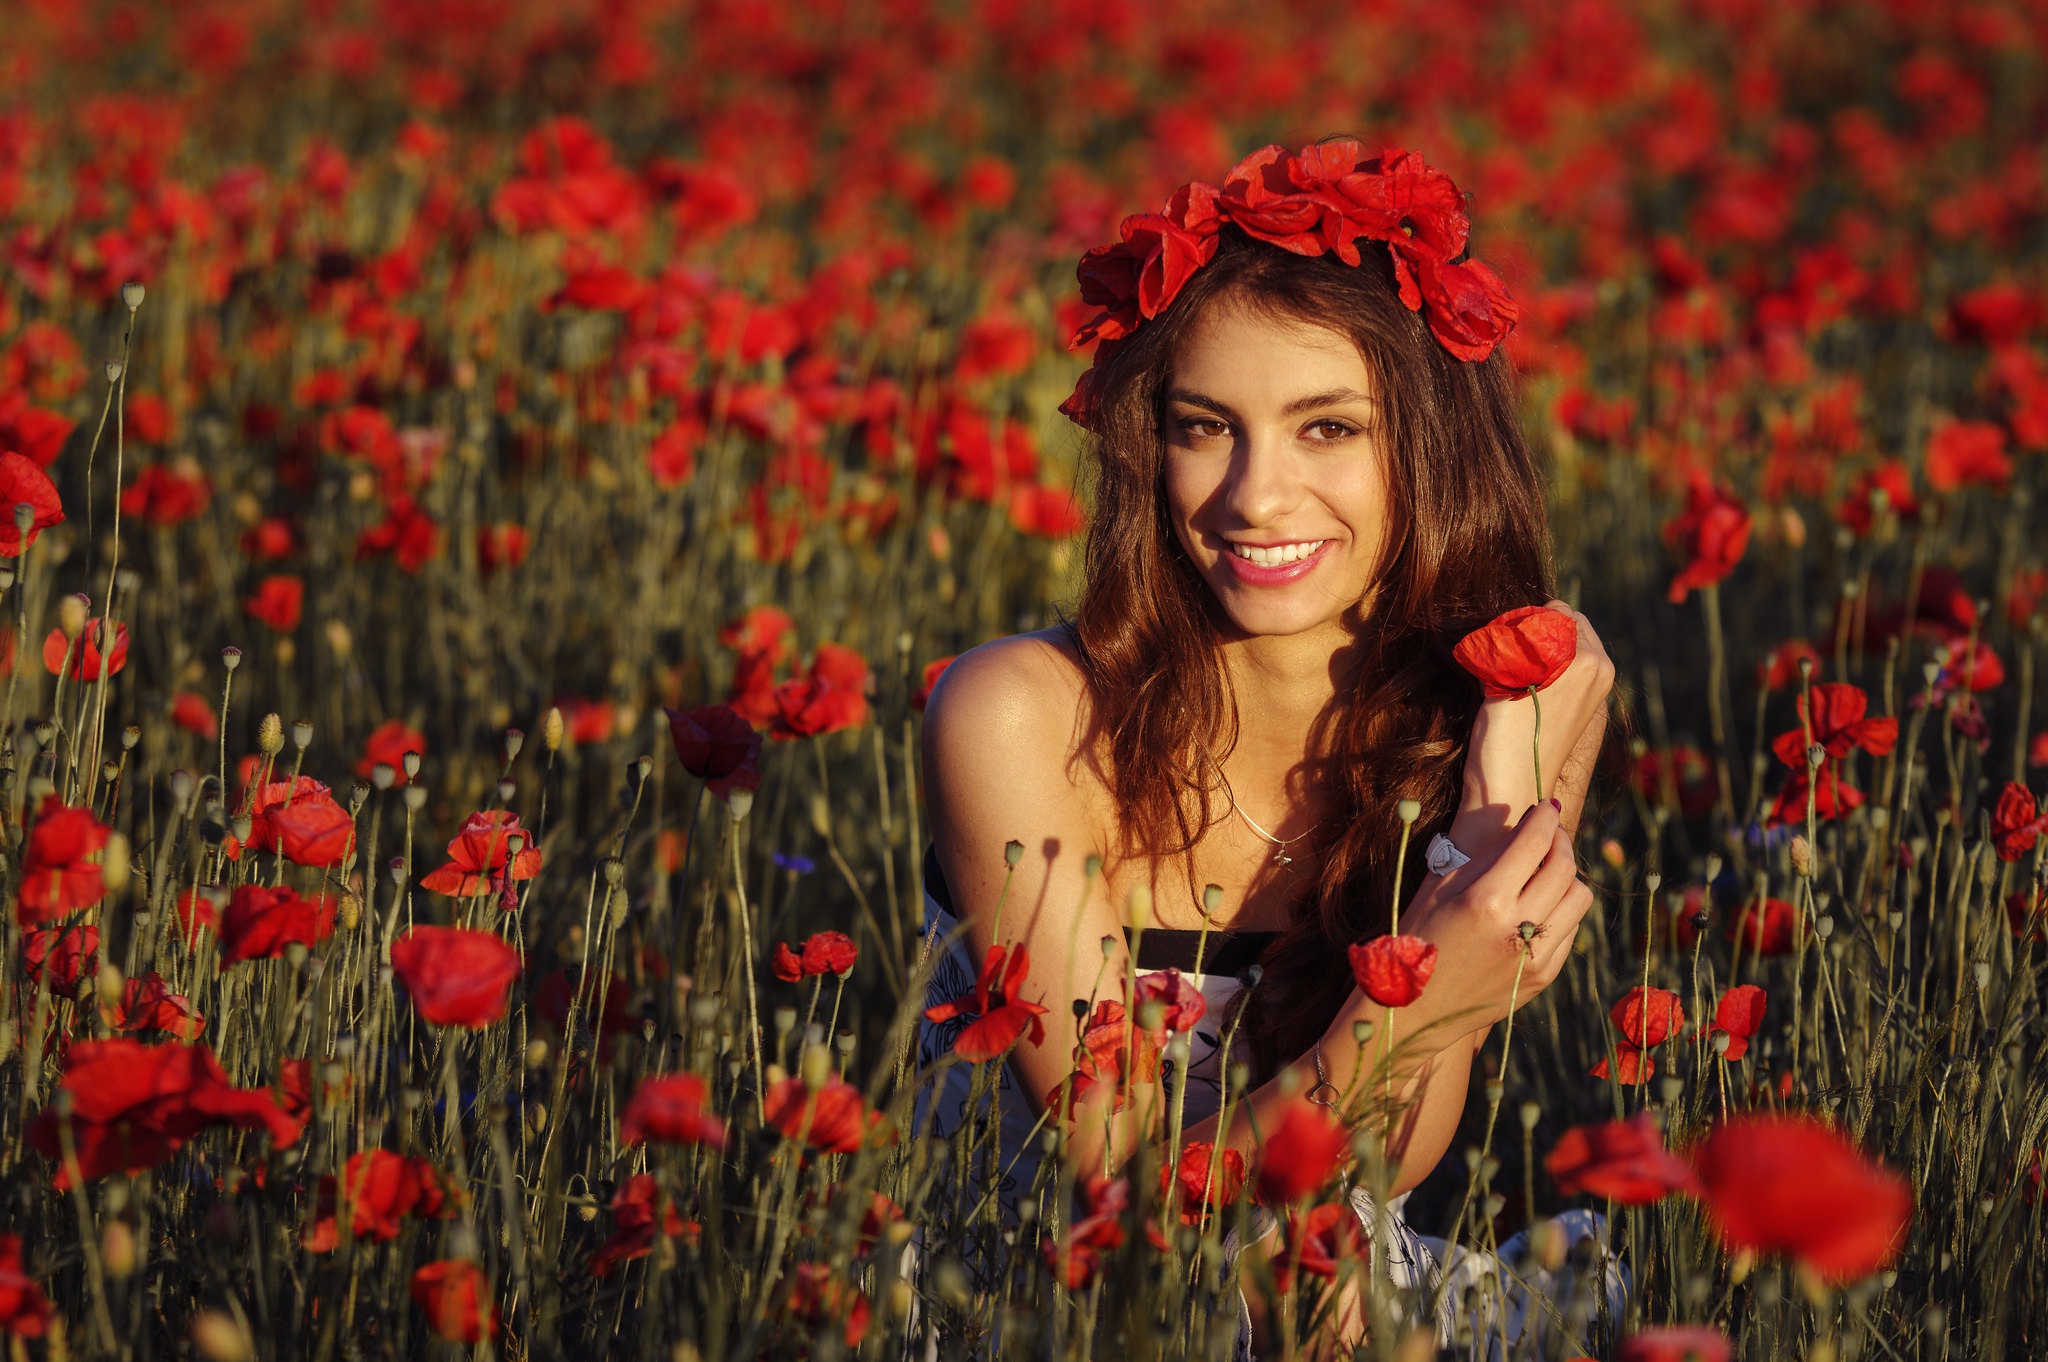 Model Outdoors Women Outdoors Women Looking At Viewer Smiling Field Flowers Plants Flower Crown Red  2048x1362